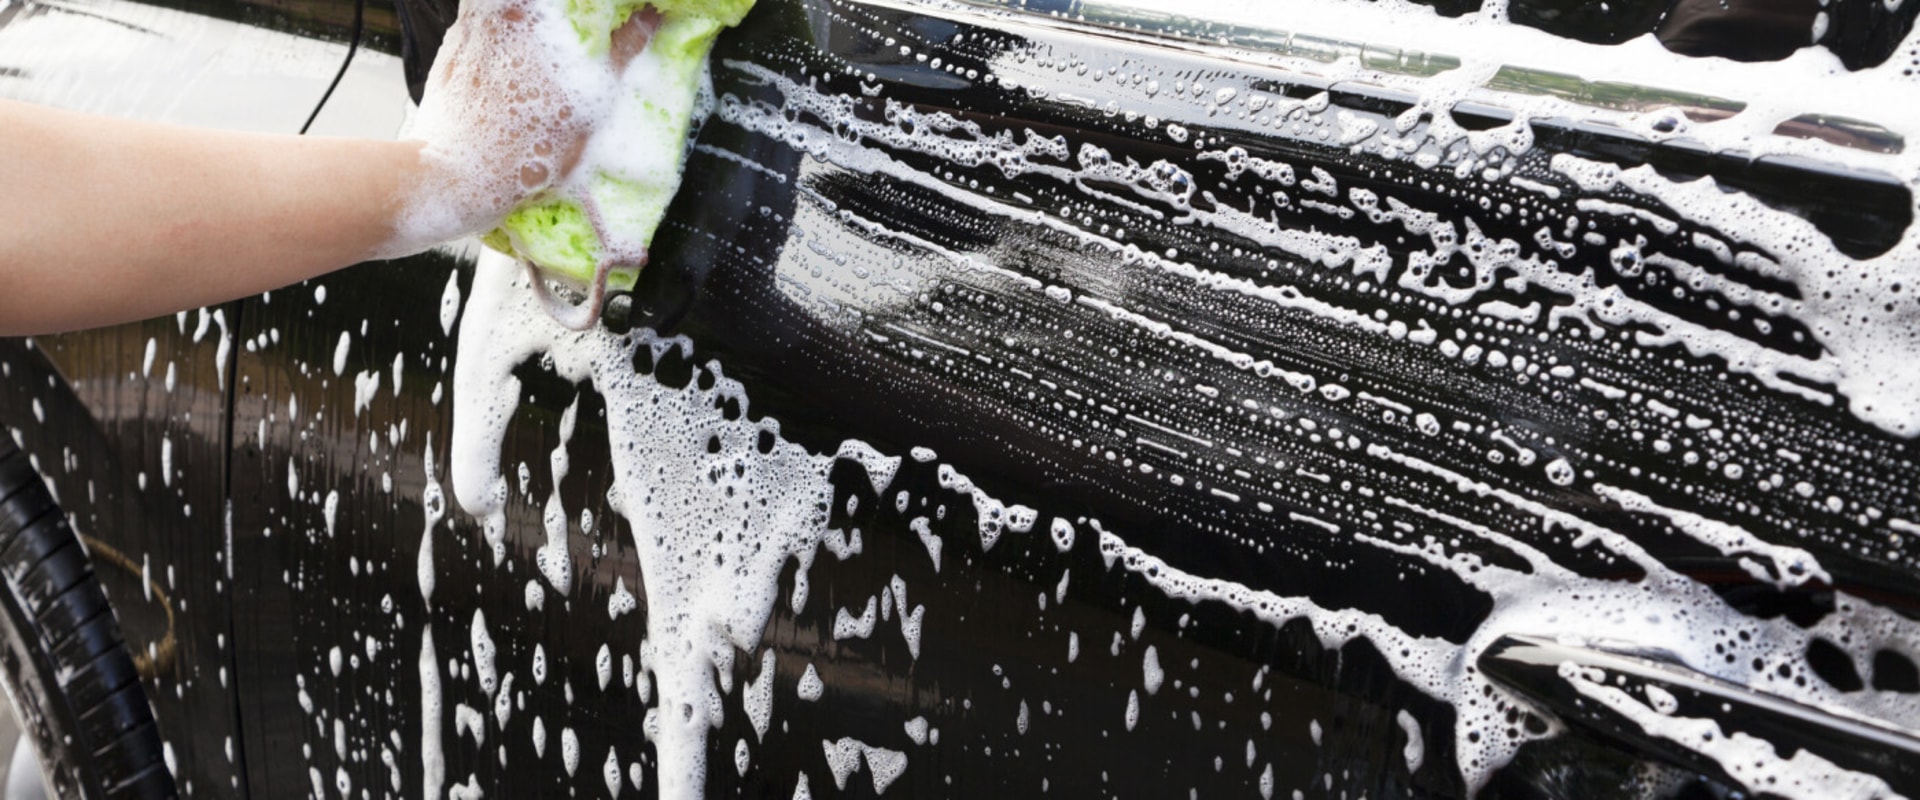 Is washing your car by hand better?